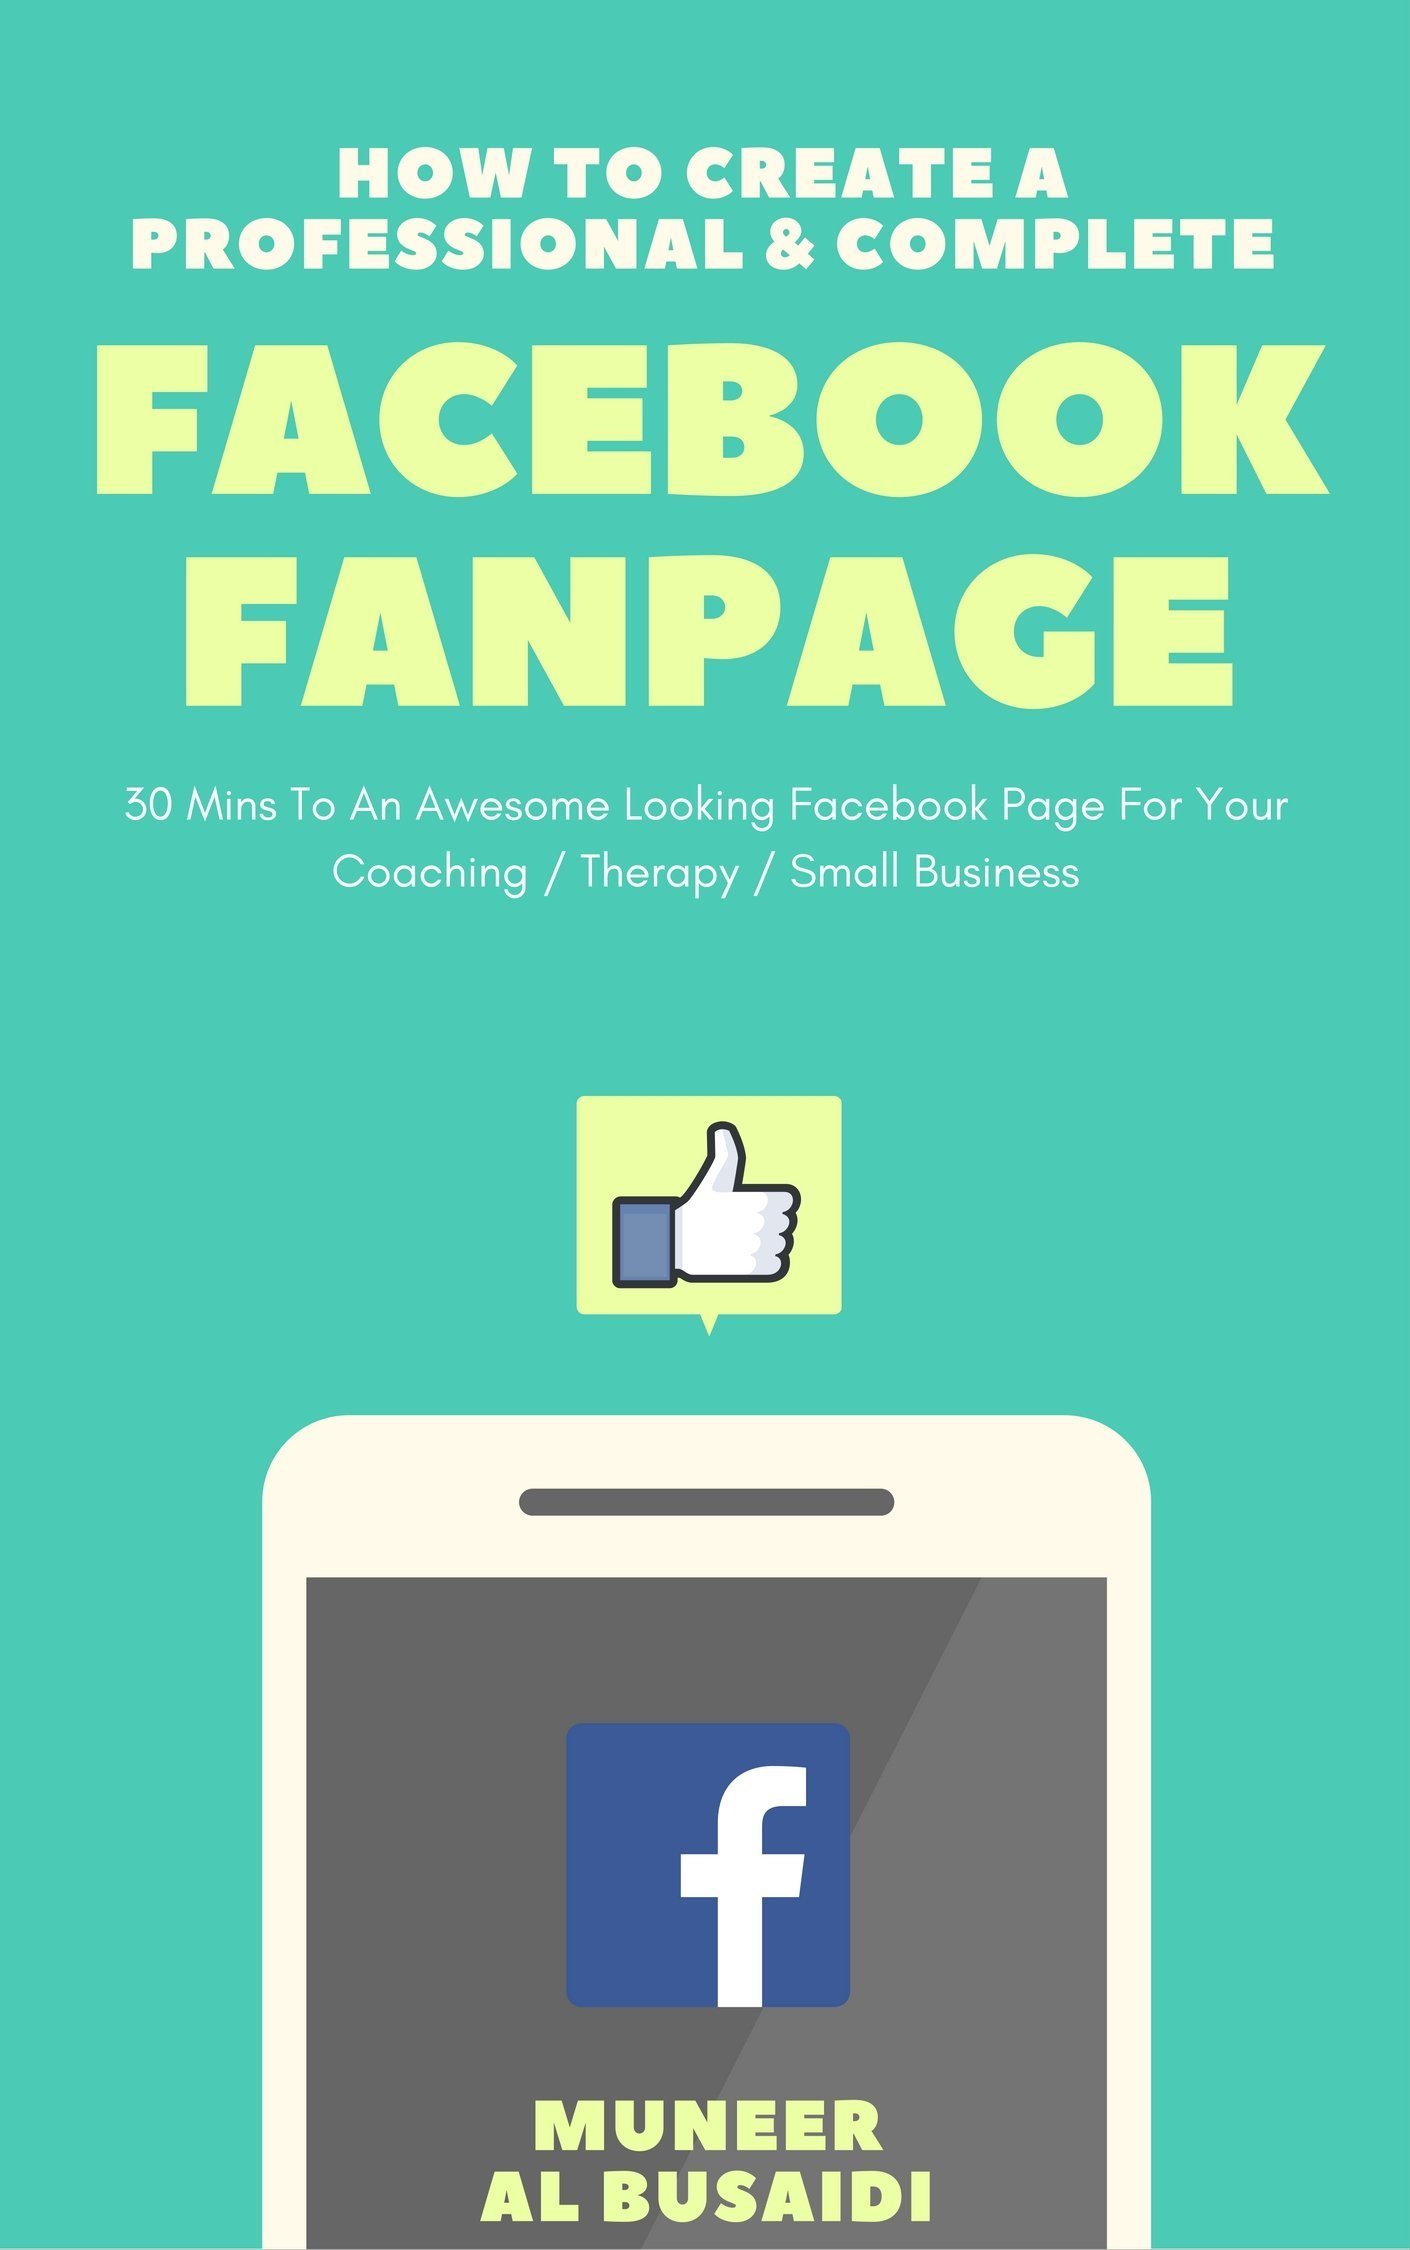 How To Create A Professional & Complete FB Fanpage